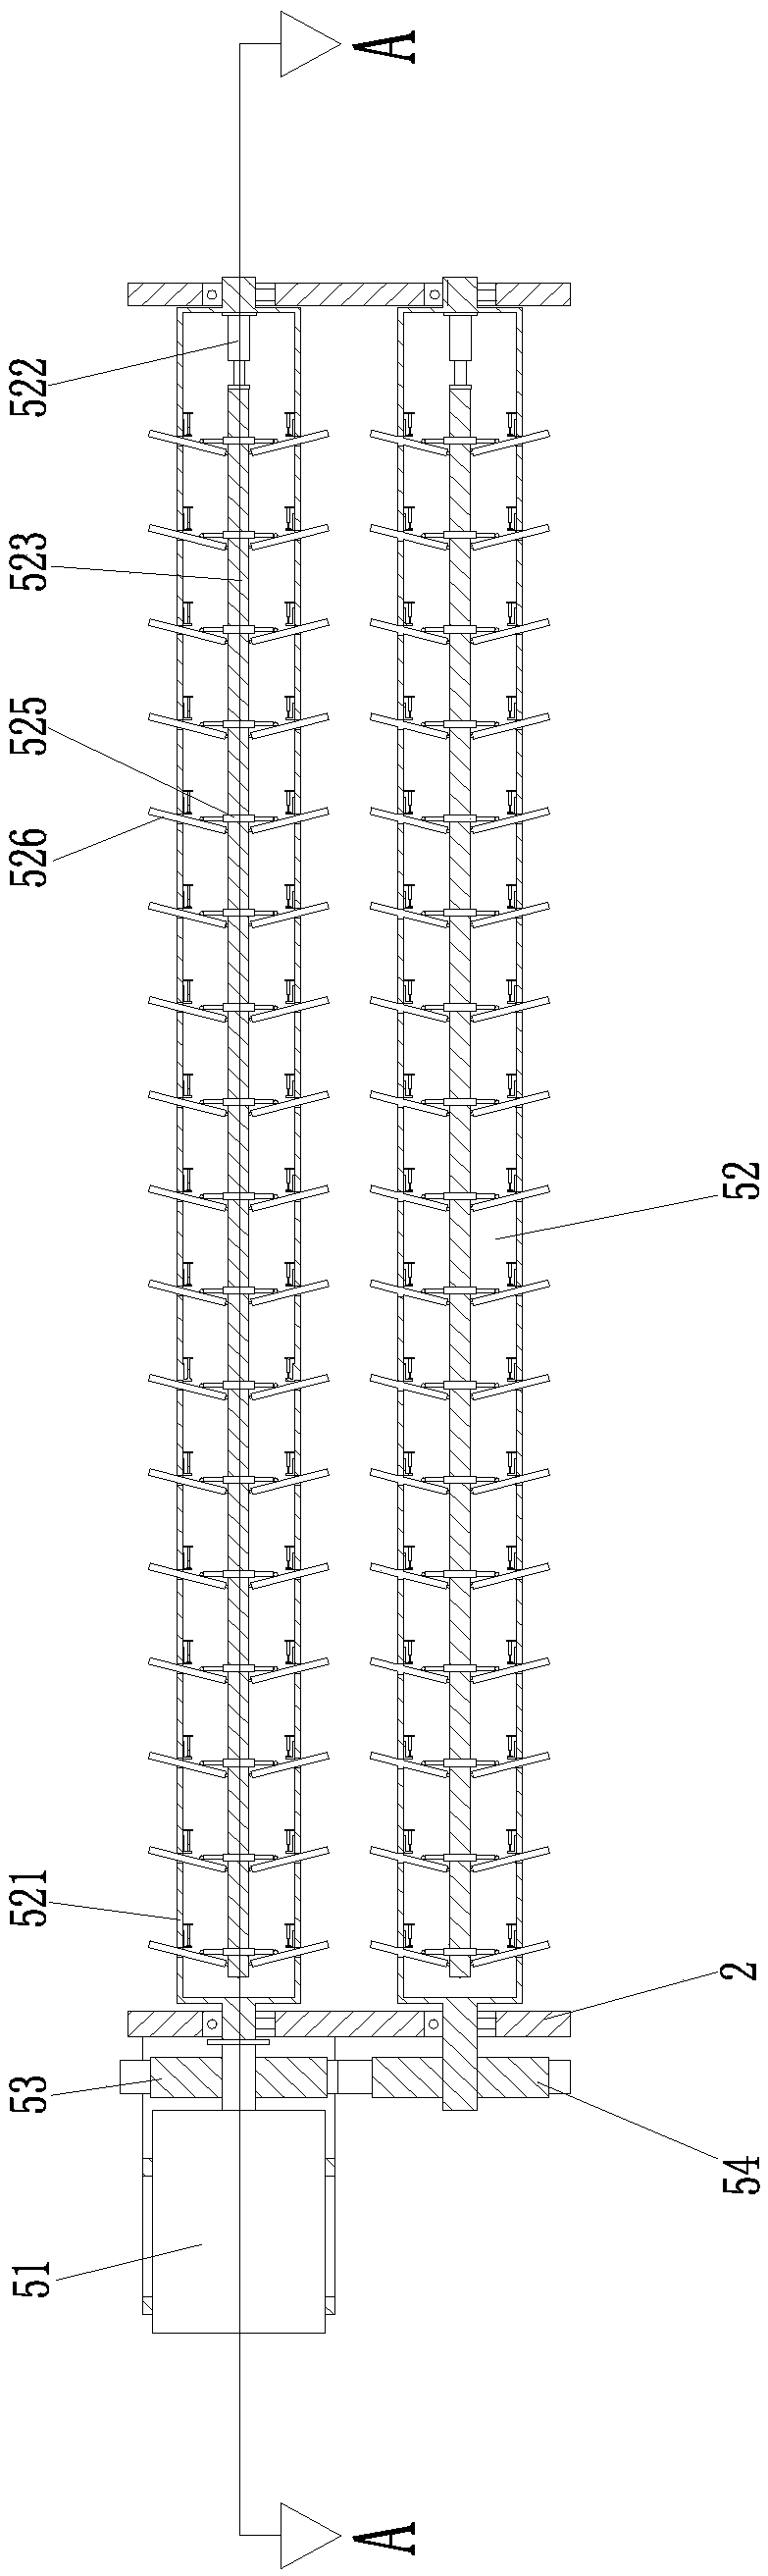 Soil remediation device capable of filtering metal elements